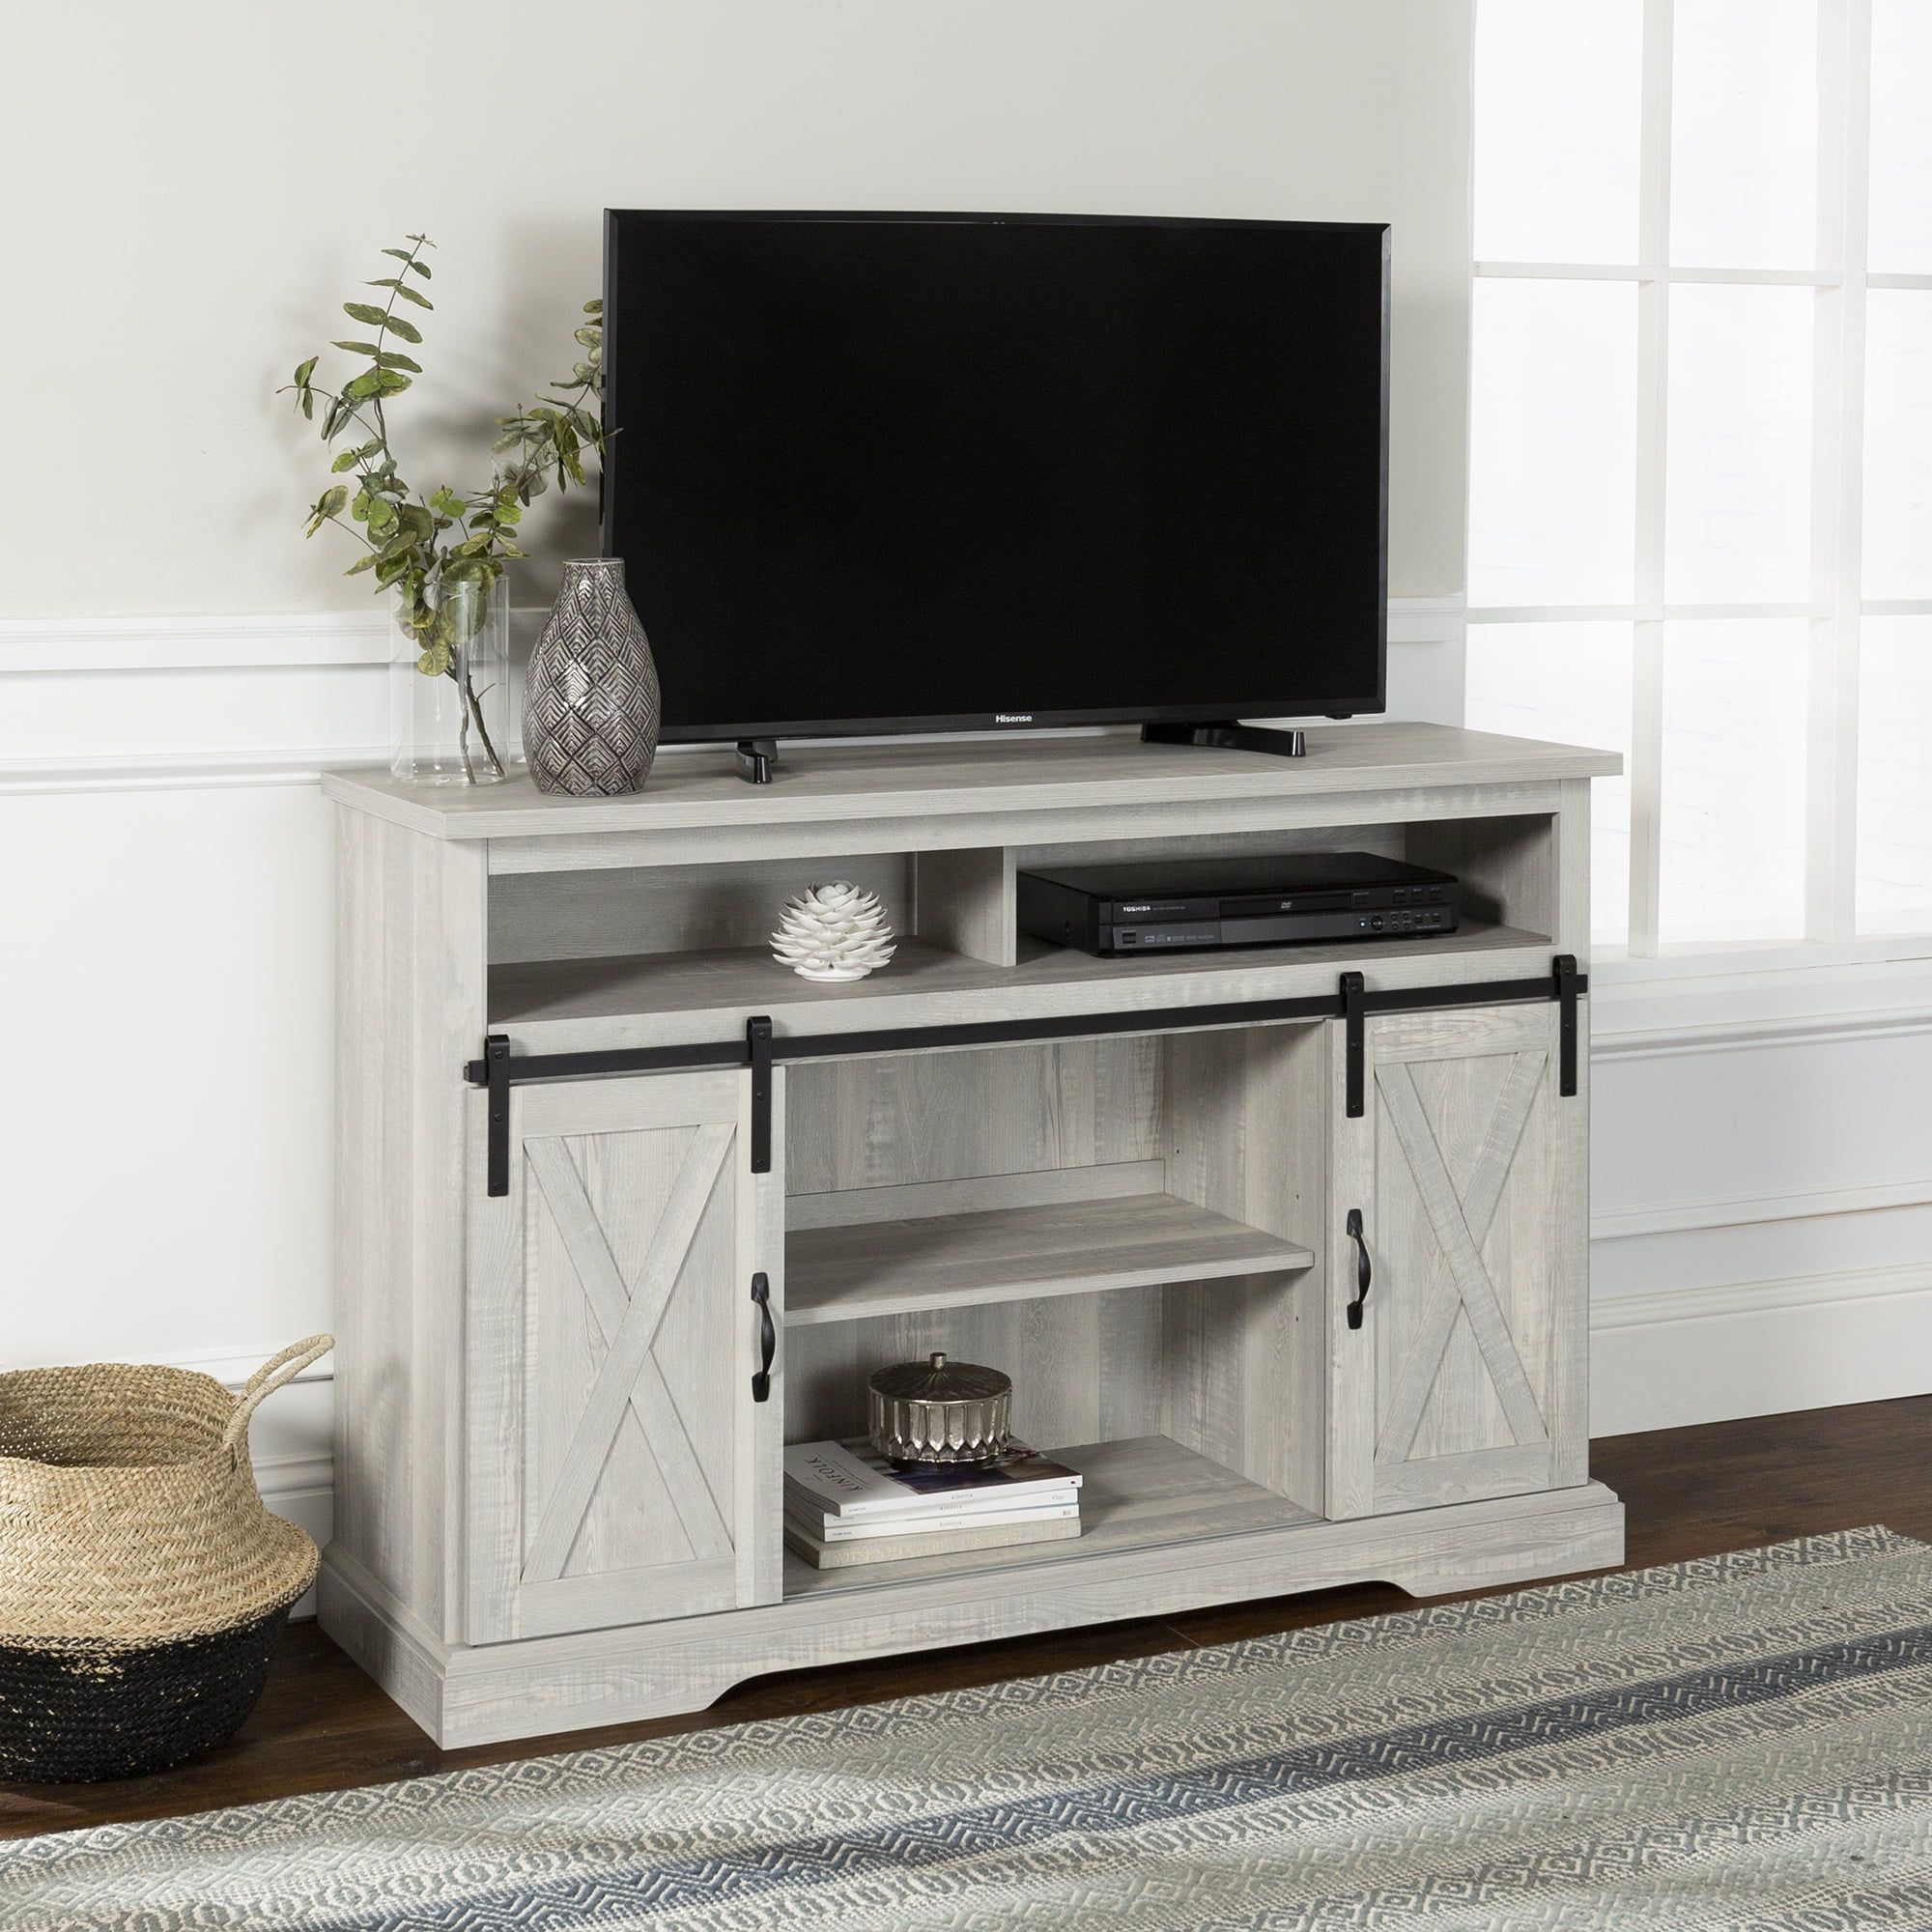 Manor Park Farmhouse Barn Door Tv Stand For Tvs Up To 58", Stone Grey Intended For Farmhouse Stands For Tvs (View 9 of 20)